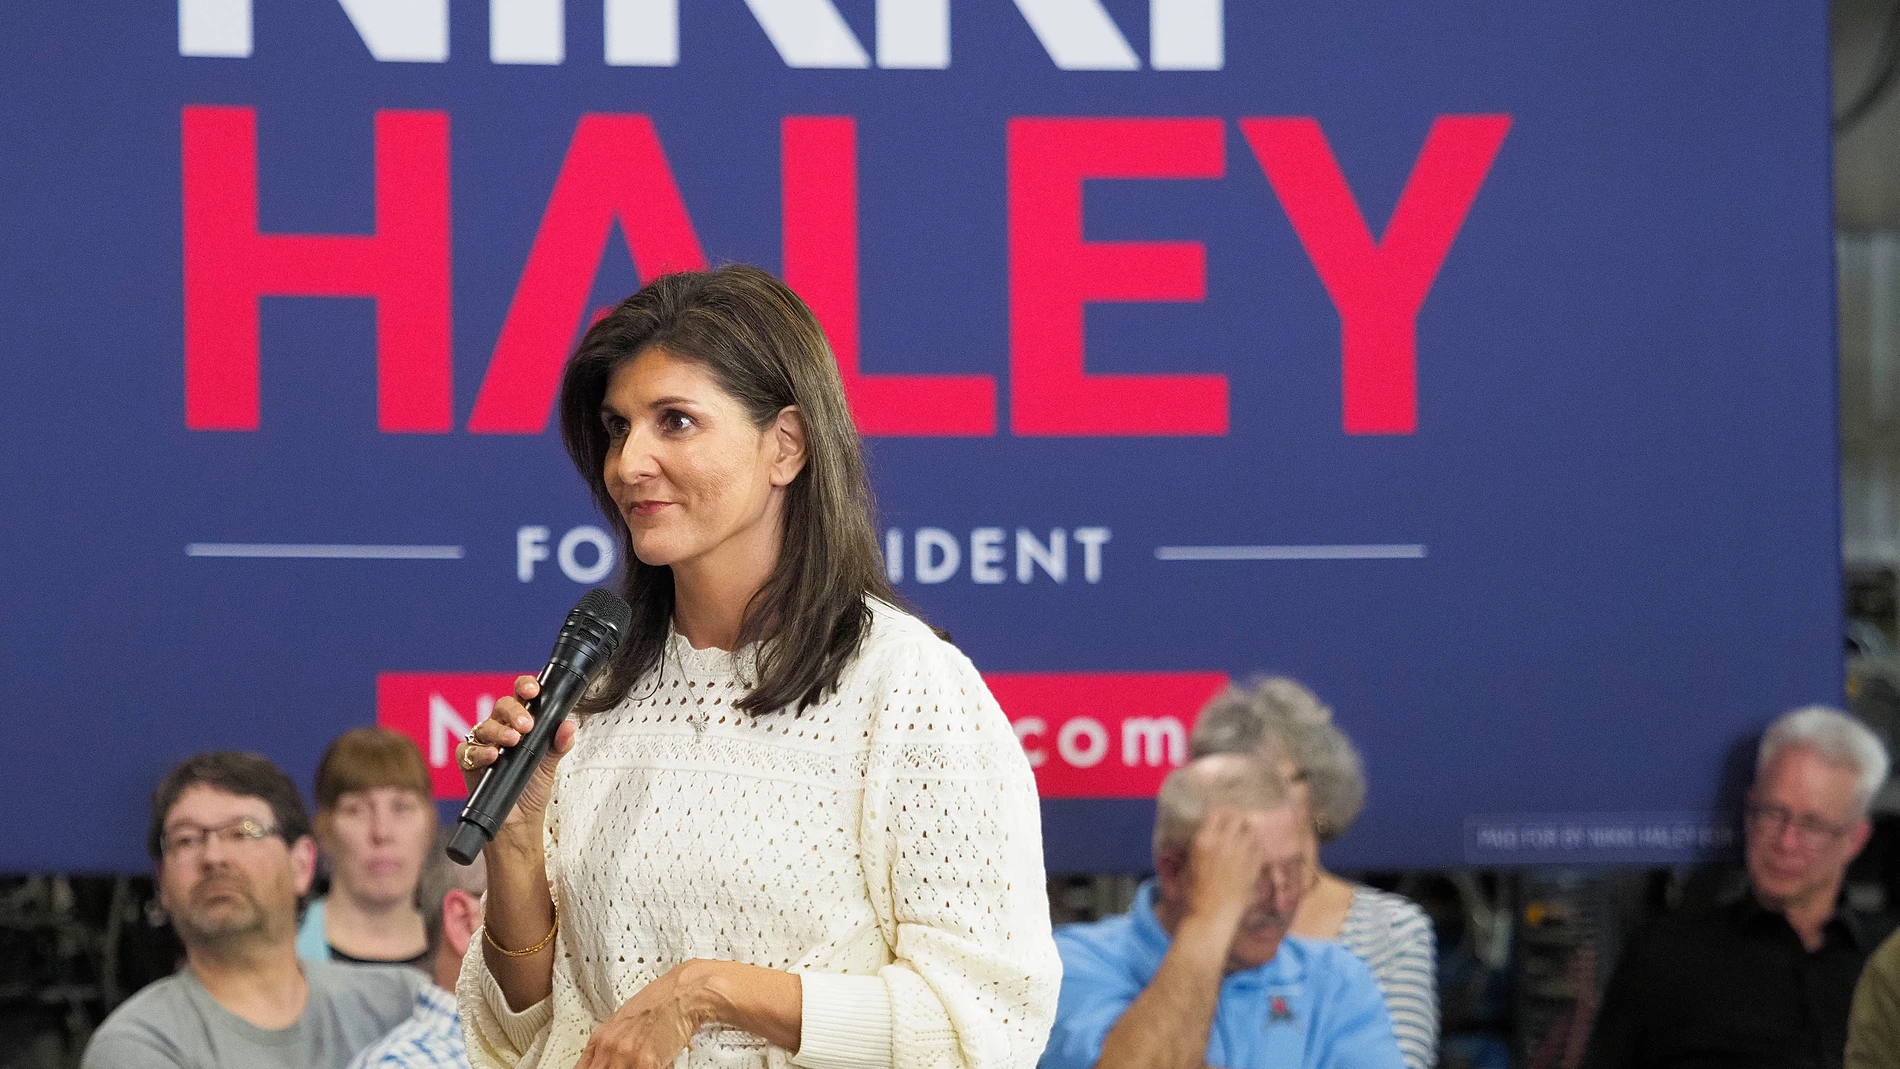 April 10, 2023, Salix, Iowa, USA: Former South Carolina Governor and U.N. Ambassador Nikki Haley begins her quest for the 2024 Republican nomination for president as she meets and talks with a small group of people as she kicks off a campaign jaunt through Iowa Monday, April 10, 2023 at the Port Neal Welding Company near Salix, Iowa. 10/04/2023